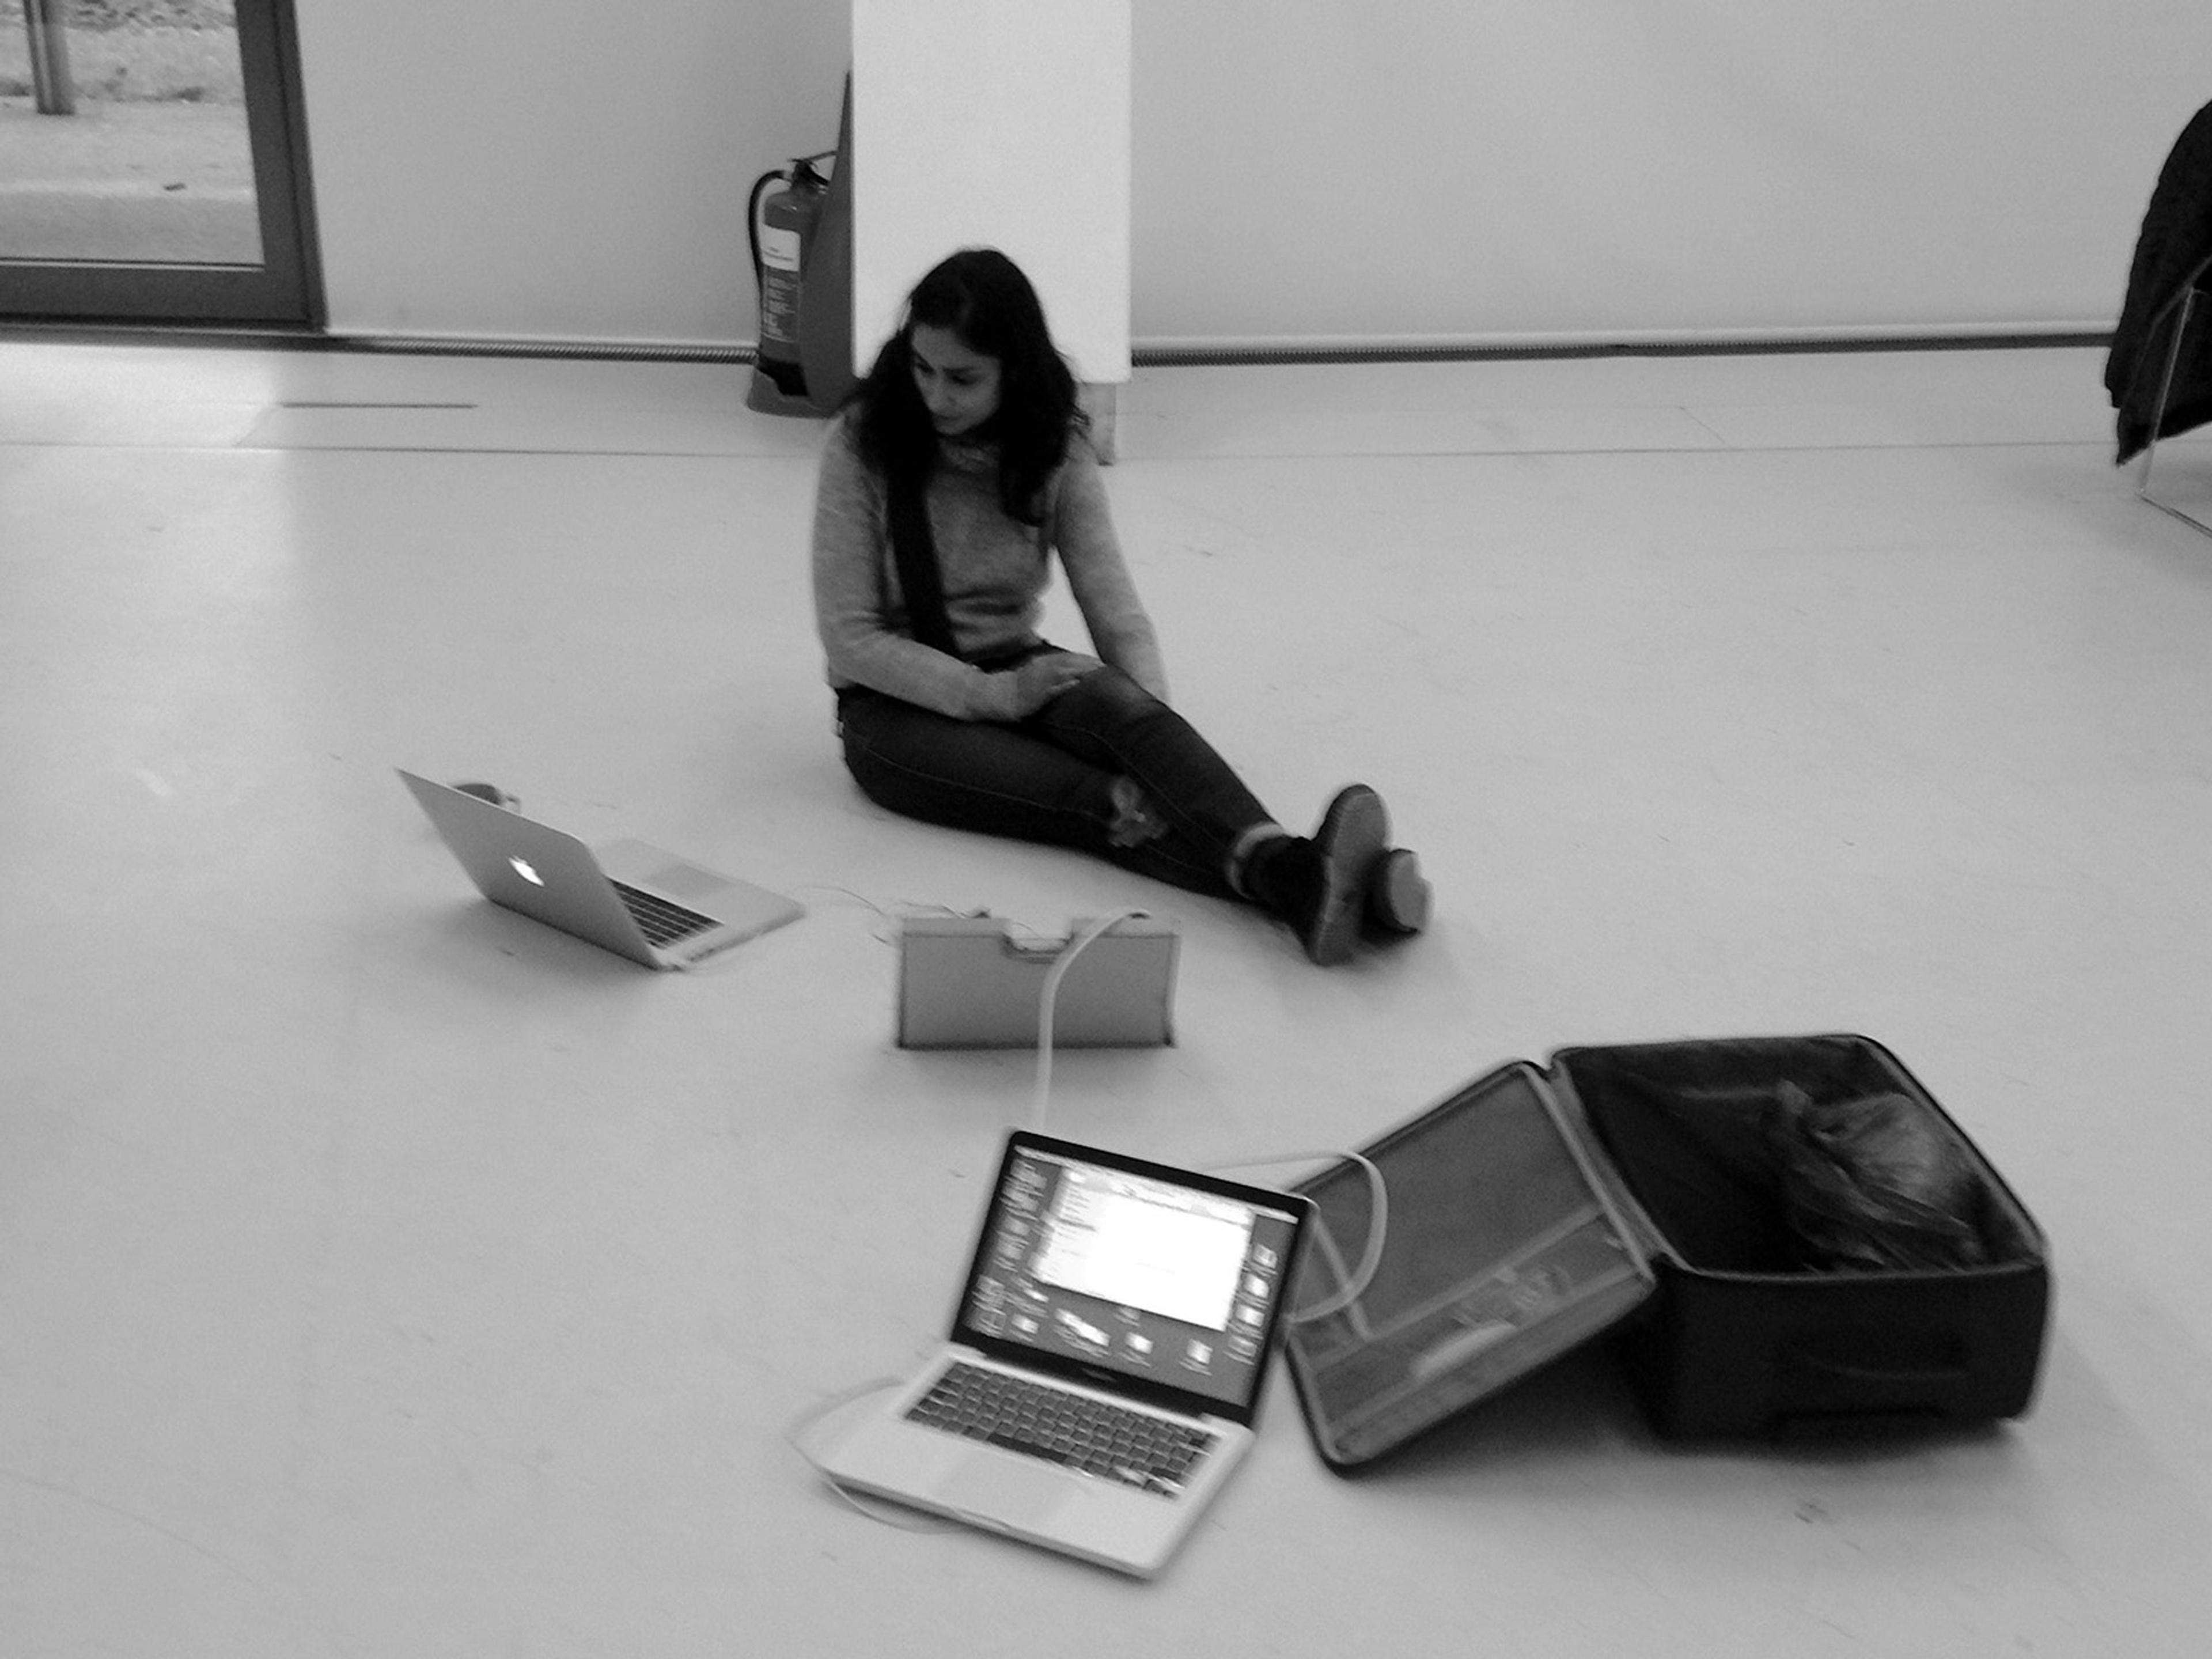 A woman sat on a floor with two laptops and an open suitcase